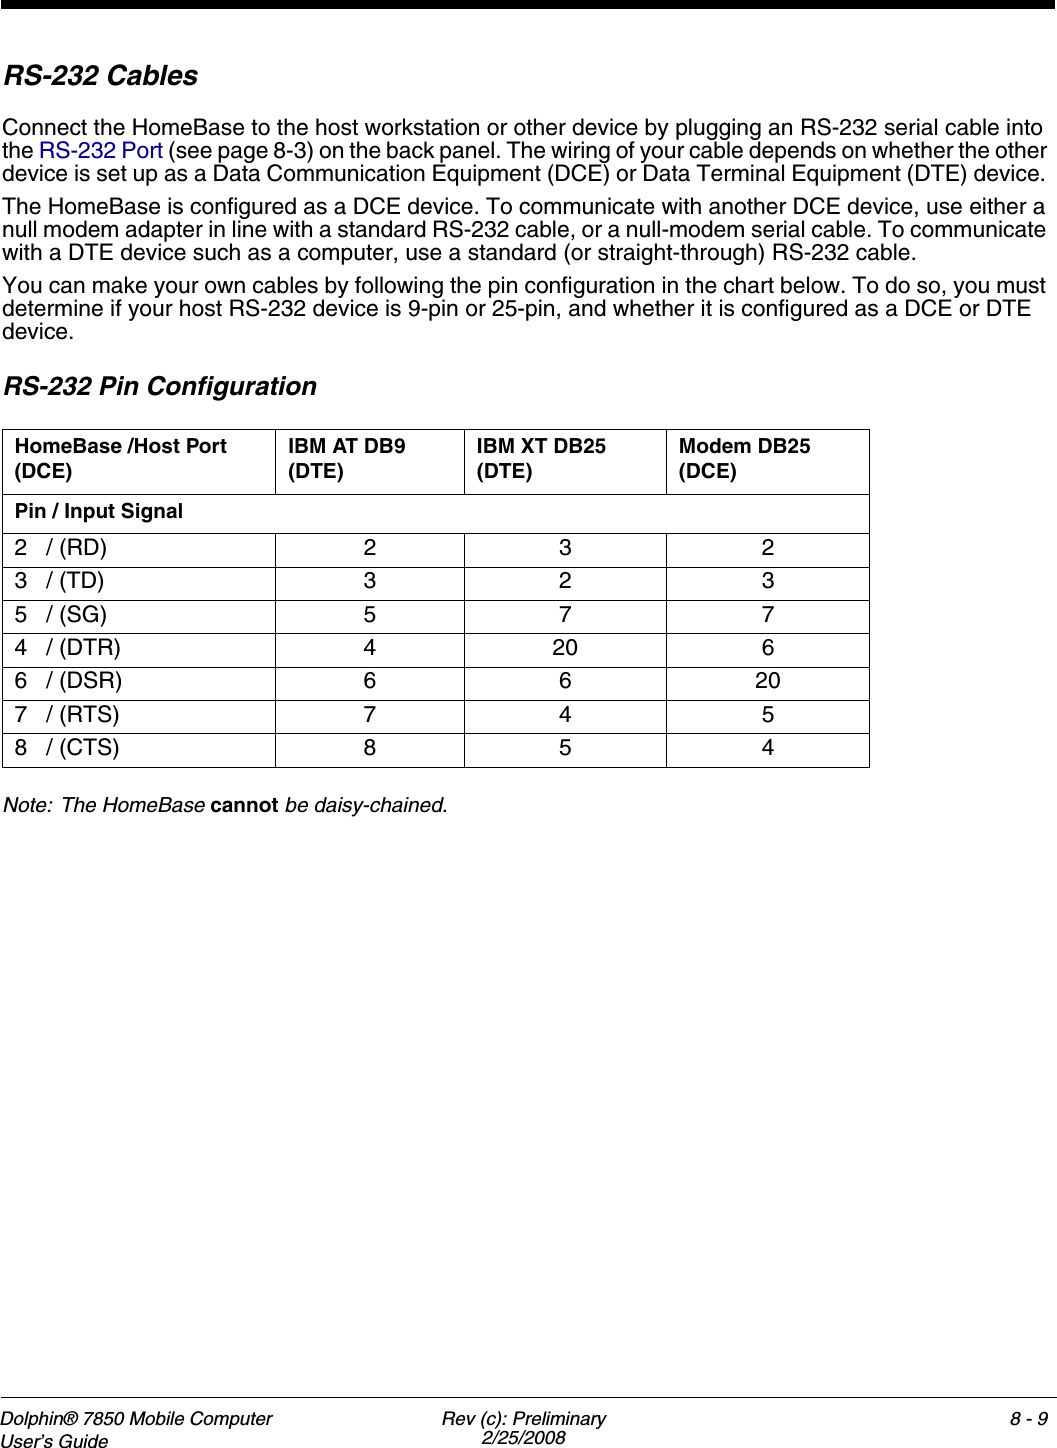 Dolphin® 7850 Mobile Computer  User’s Guide Rev (c): Preliminary2/25/20088 - 9RS-232 CablesConnect the HomeBase to the host workstation or other device by plugging an RS-232 serial cable into the RS-232 Port (see page 8-3) on the back panel. The wiring of your cable depends on whether the other device is set up as a Data Communication Equipment (DCE) or Data Terminal Equipment (DTE) device. The HomeBase is configured as a DCE device. To communicate with another DCE device, use either a null modem adapter in line with a standard RS-232 cable, or a null-modem serial cable. To communicate with a DTE device such as a computer, use a standard (or straight-through) RS-232 cable. You can make your own cables by following the pin configuration in the chart below. To do so, you must determine if your host RS-232 device is 9-pin or 25-pin, and whether it is configured as a DCE or DTE device.RS-232 Pin ConfigurationNote: The HomeBase cannot be daisy-chained.HomeBase /Host Port (DCE)IBM AT DB9 (DTE)IBM XT DB25 (DTE)Modem DB25 (DCE)Pin / Input Signal2   / (RD) 2 3 23   / (TD) 3 2 35   / (SG) 5 7 74   / (DTR) 4 20 66   / (DSR) 6 6 207   / (RTS) 7 4 58   / (CTS) 8 5 4